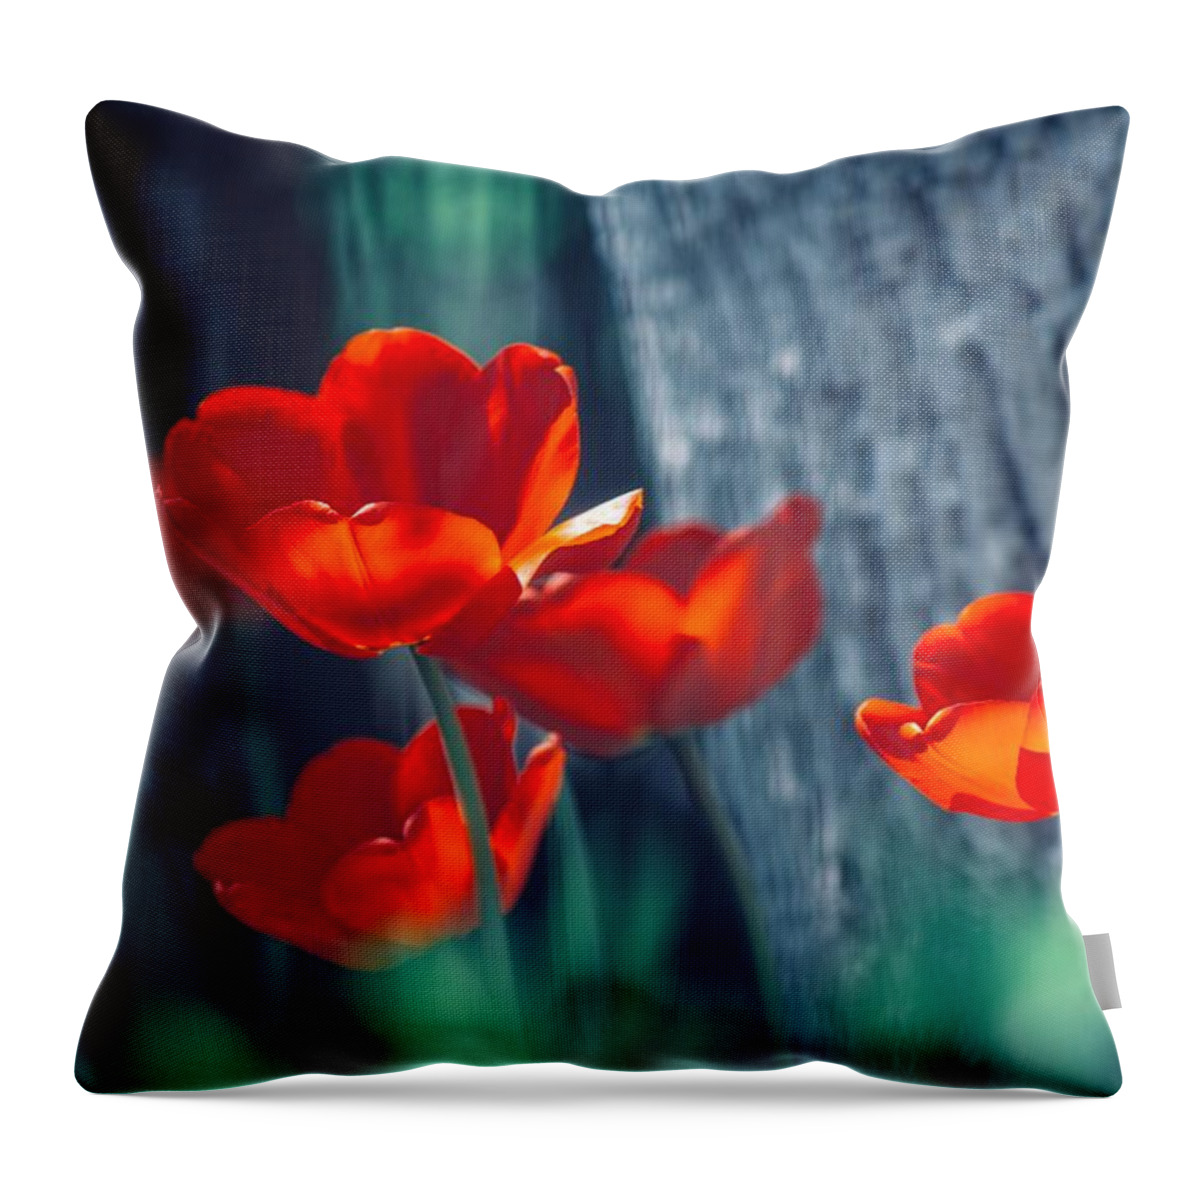 Tulip Throw Pillow featuring the digital art Tulip by Maye Loeser